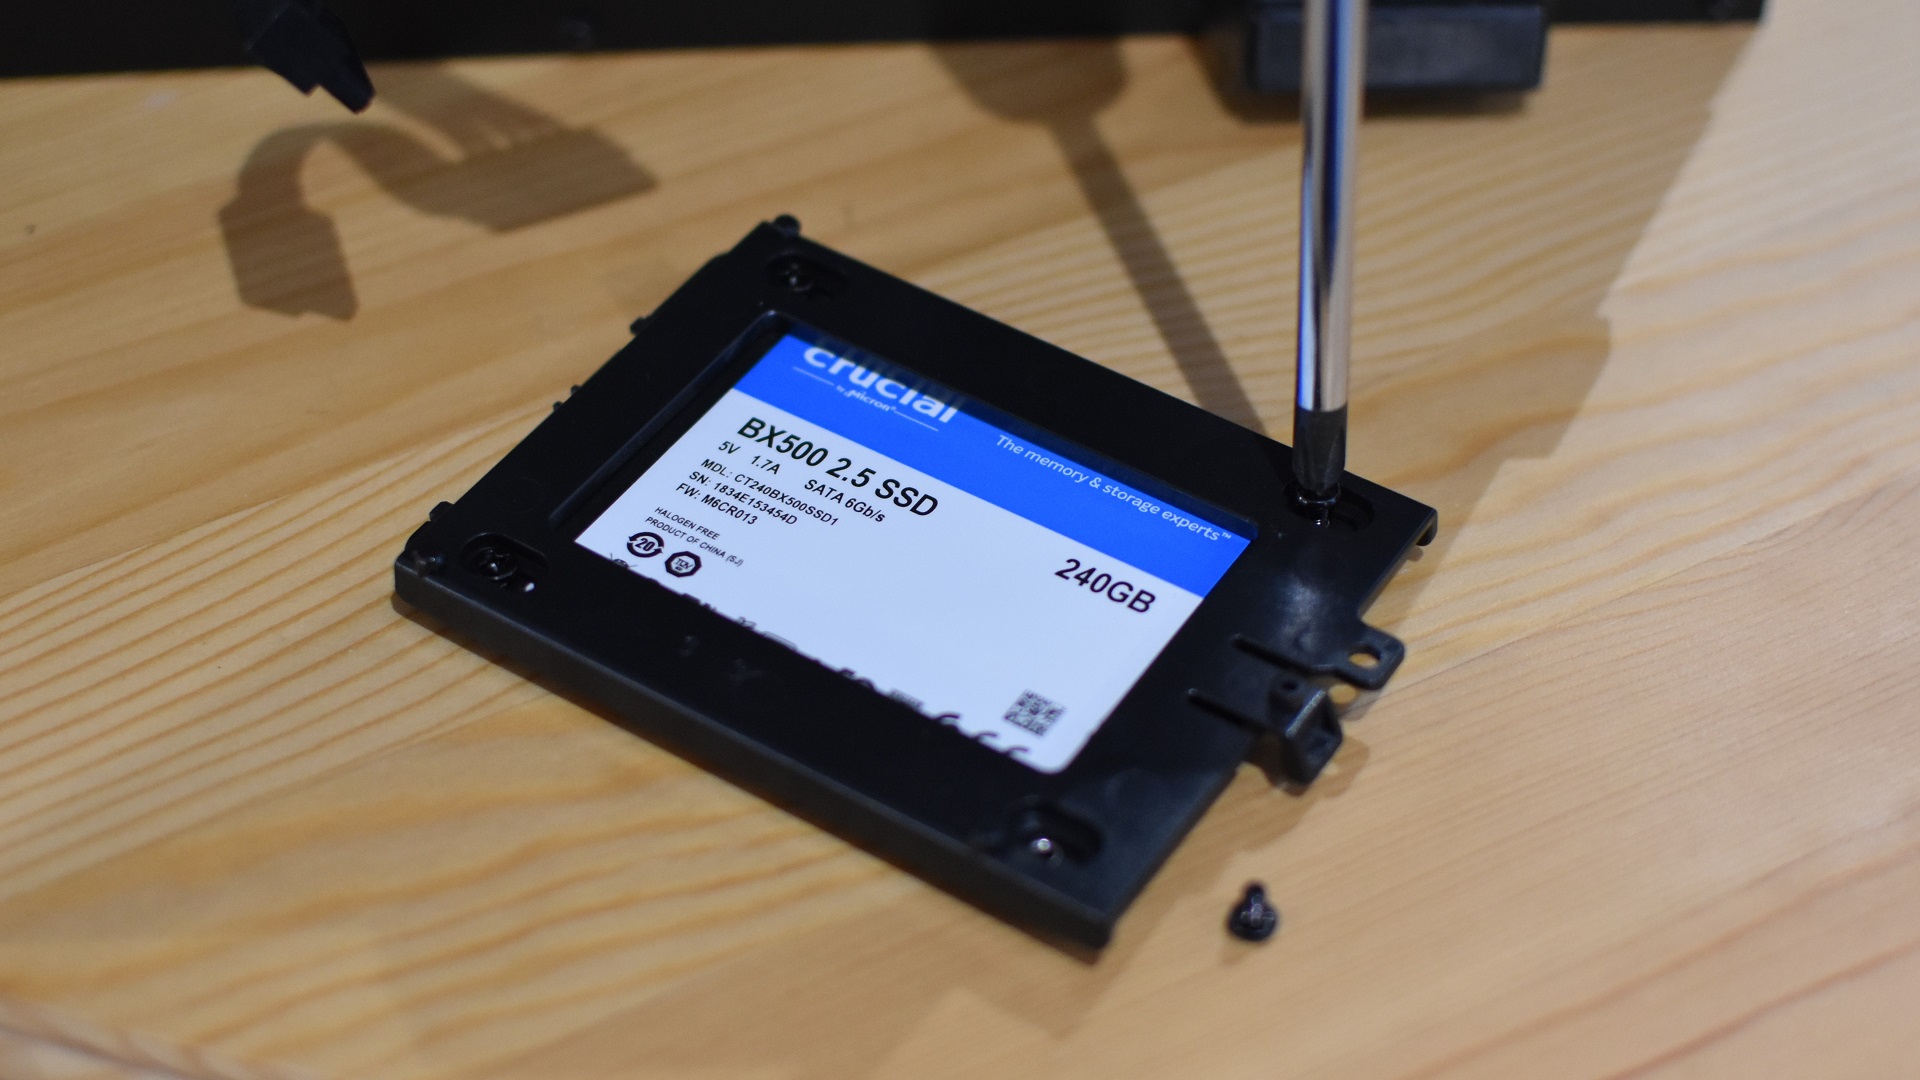 Step 2 of how to install a SATA SSD: attach the SSD to the mounting hardware, using screws if necessary.